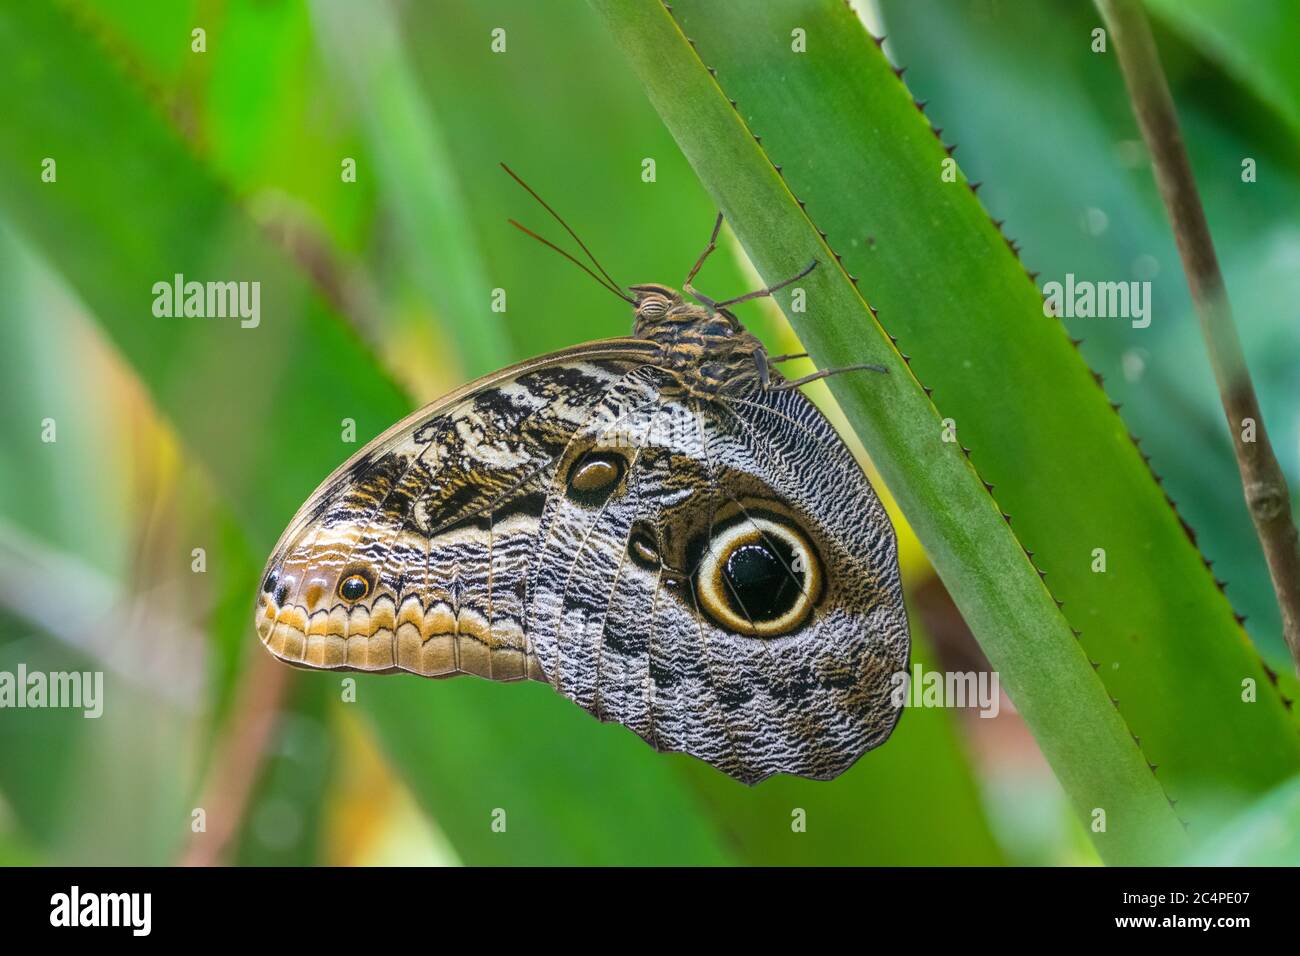 Owl butterfly perched on a leaf in the brazilian Atlantic Rainforest. Stock Photo